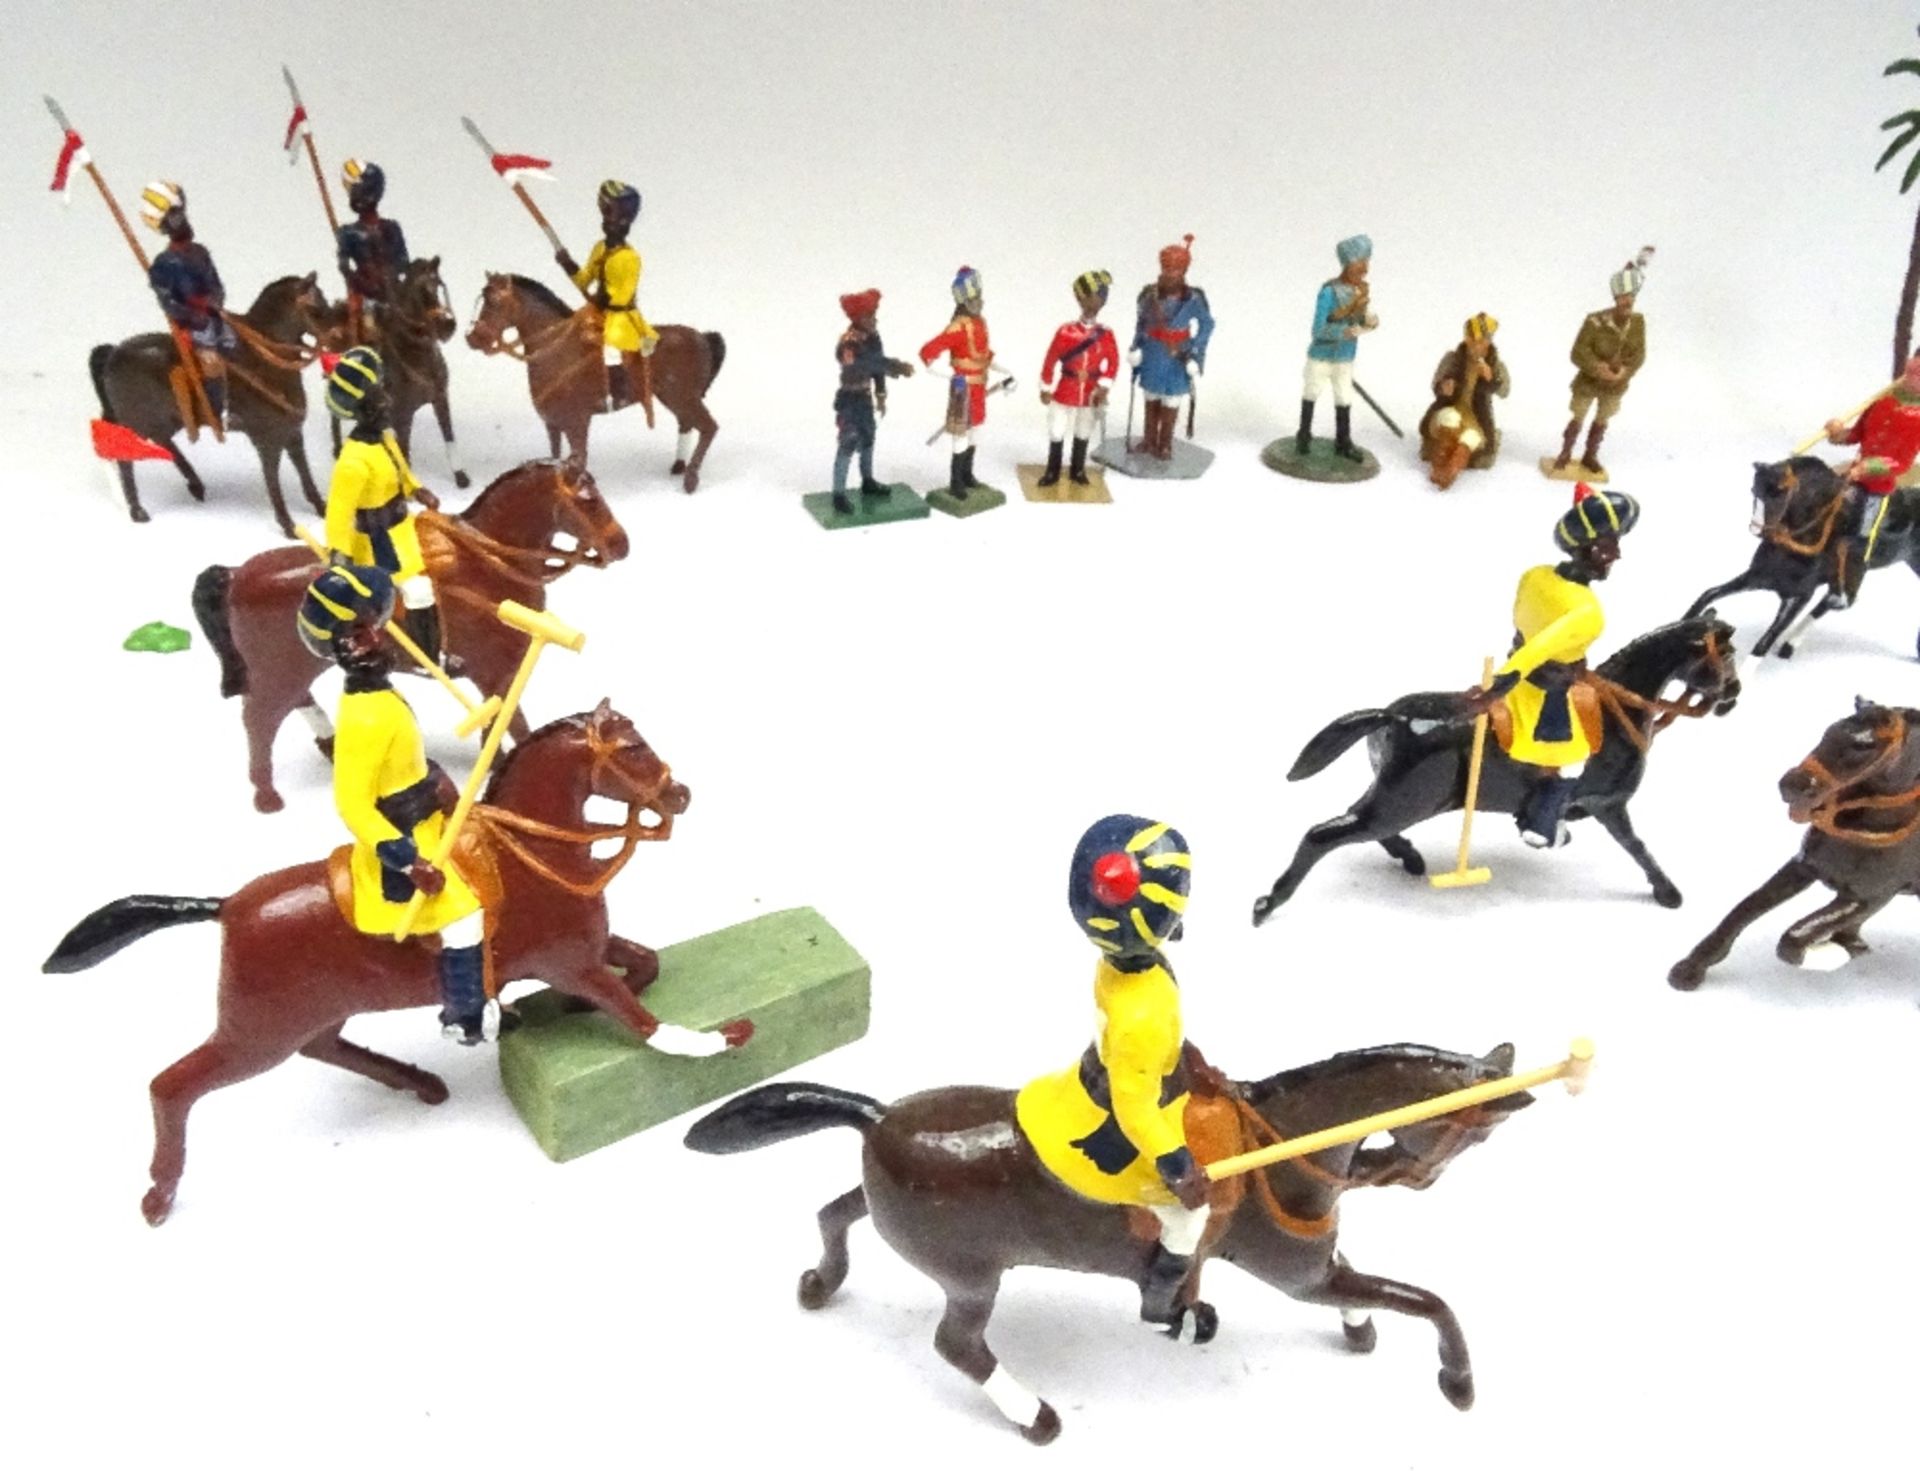 British India, The Polo Game - Image 3 of 5